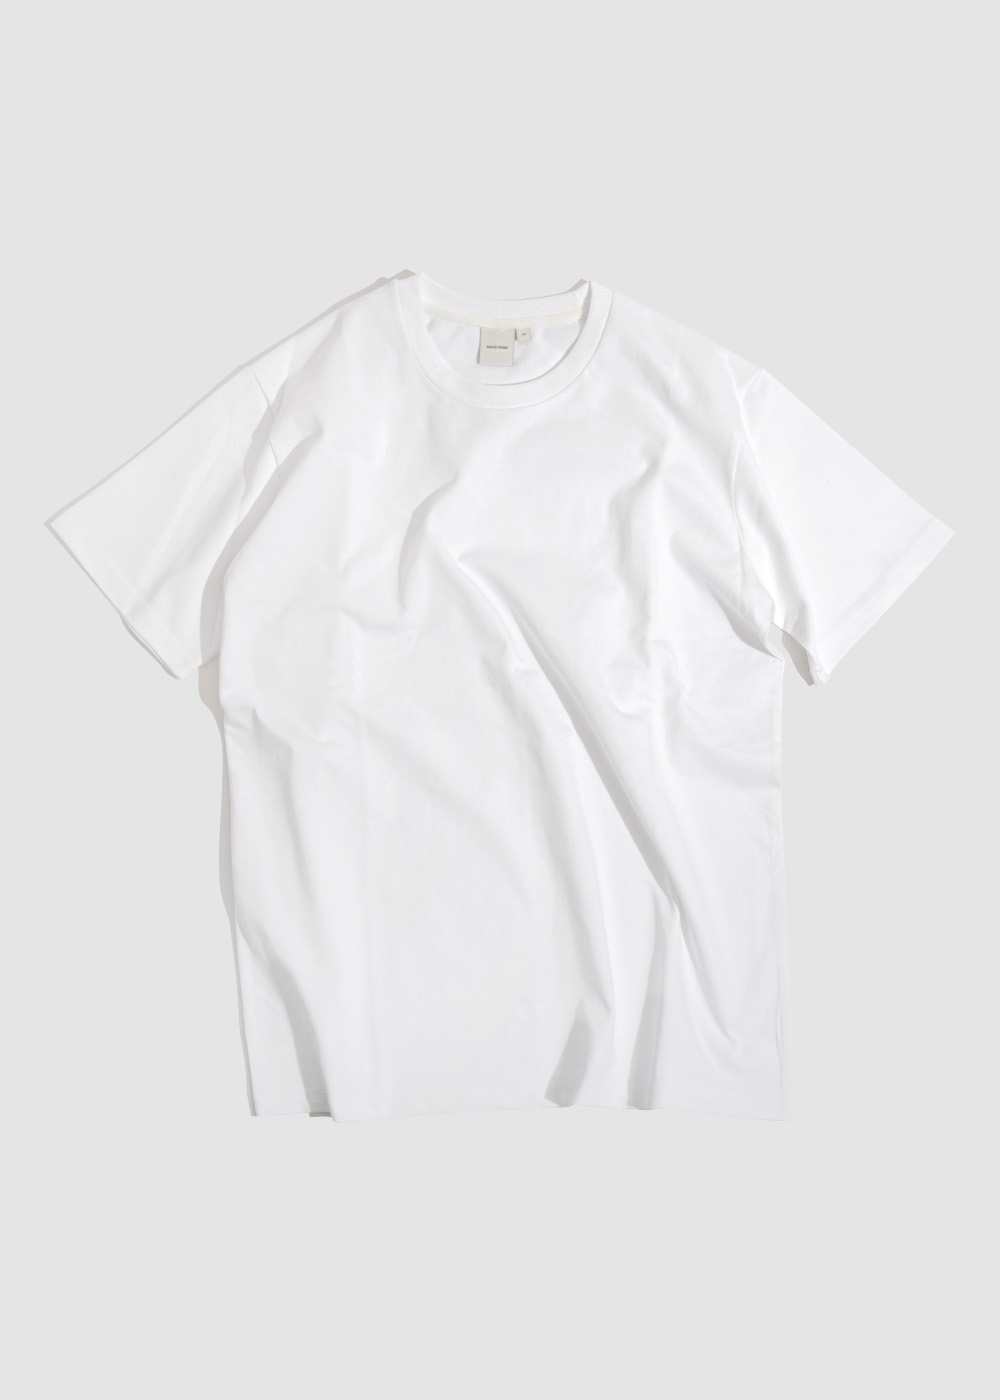 A. Silked Combed Cotton 100% 20/2 Single T-shirt _ white